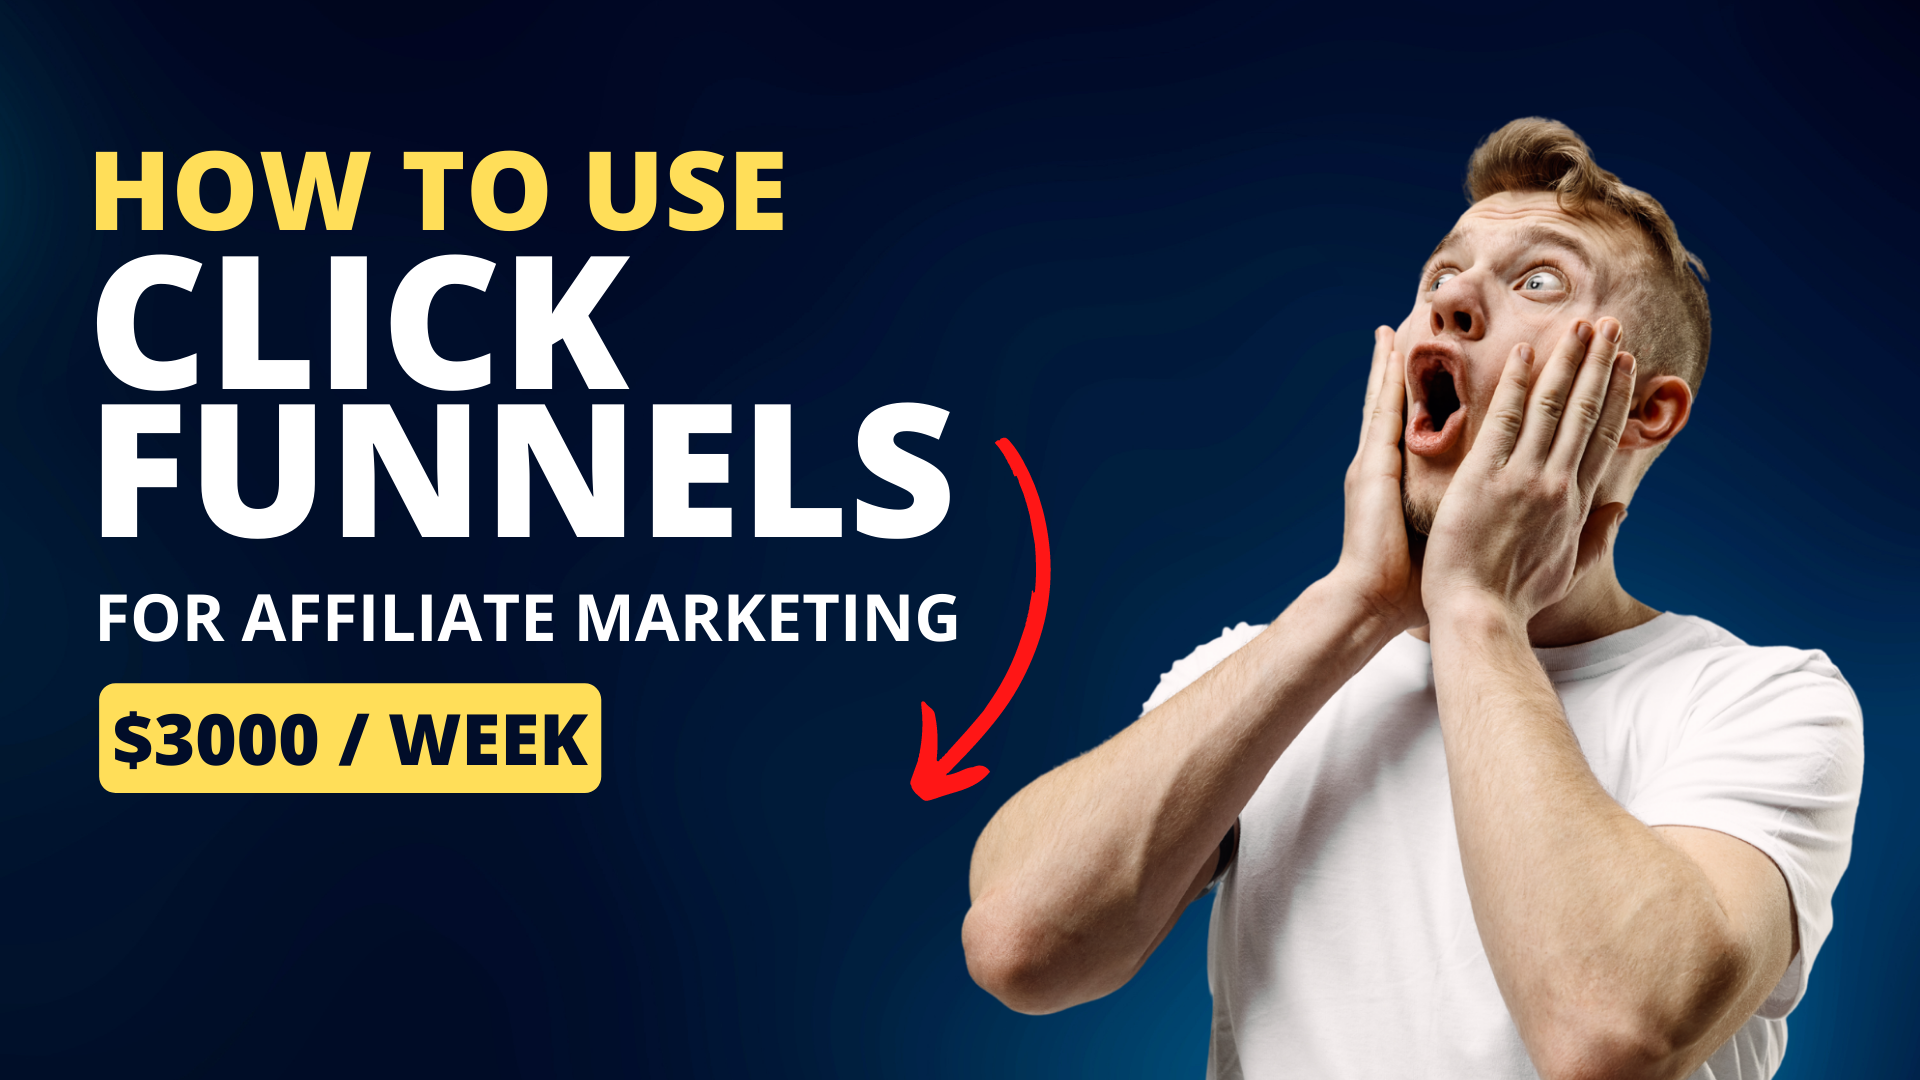 How to Use ClickFunnels for Affiliate Marketing